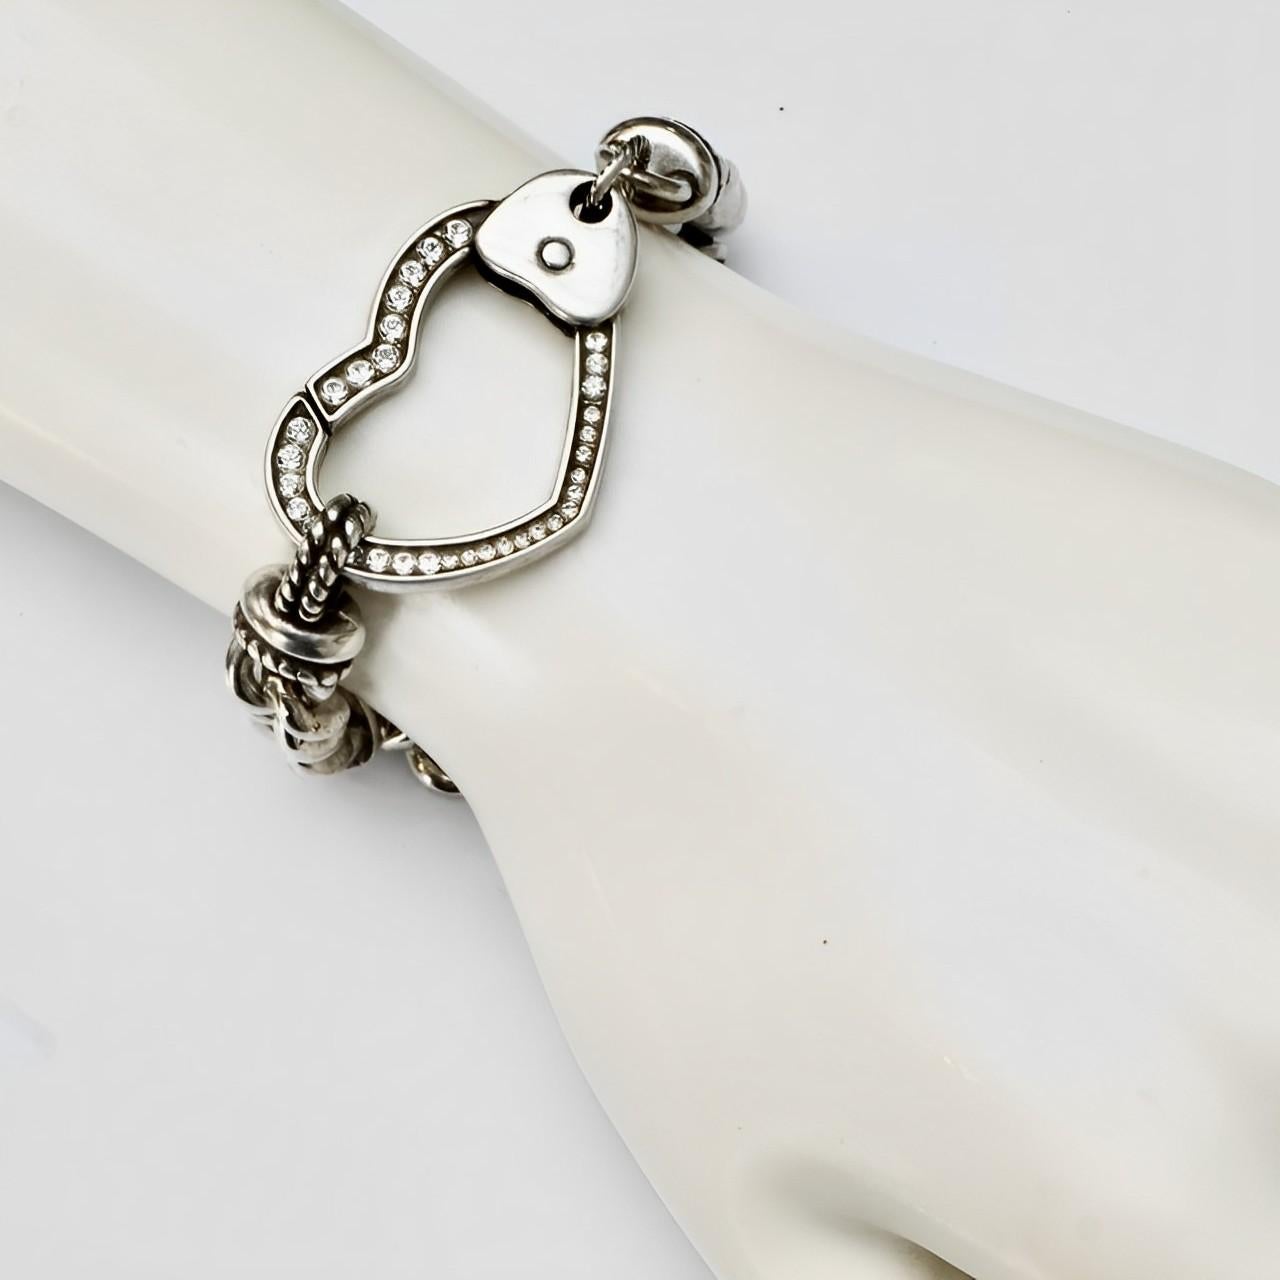 Silver and Clear Rhinestones Curb Link Bracelet with a Large Heart Clasp For Sale 3